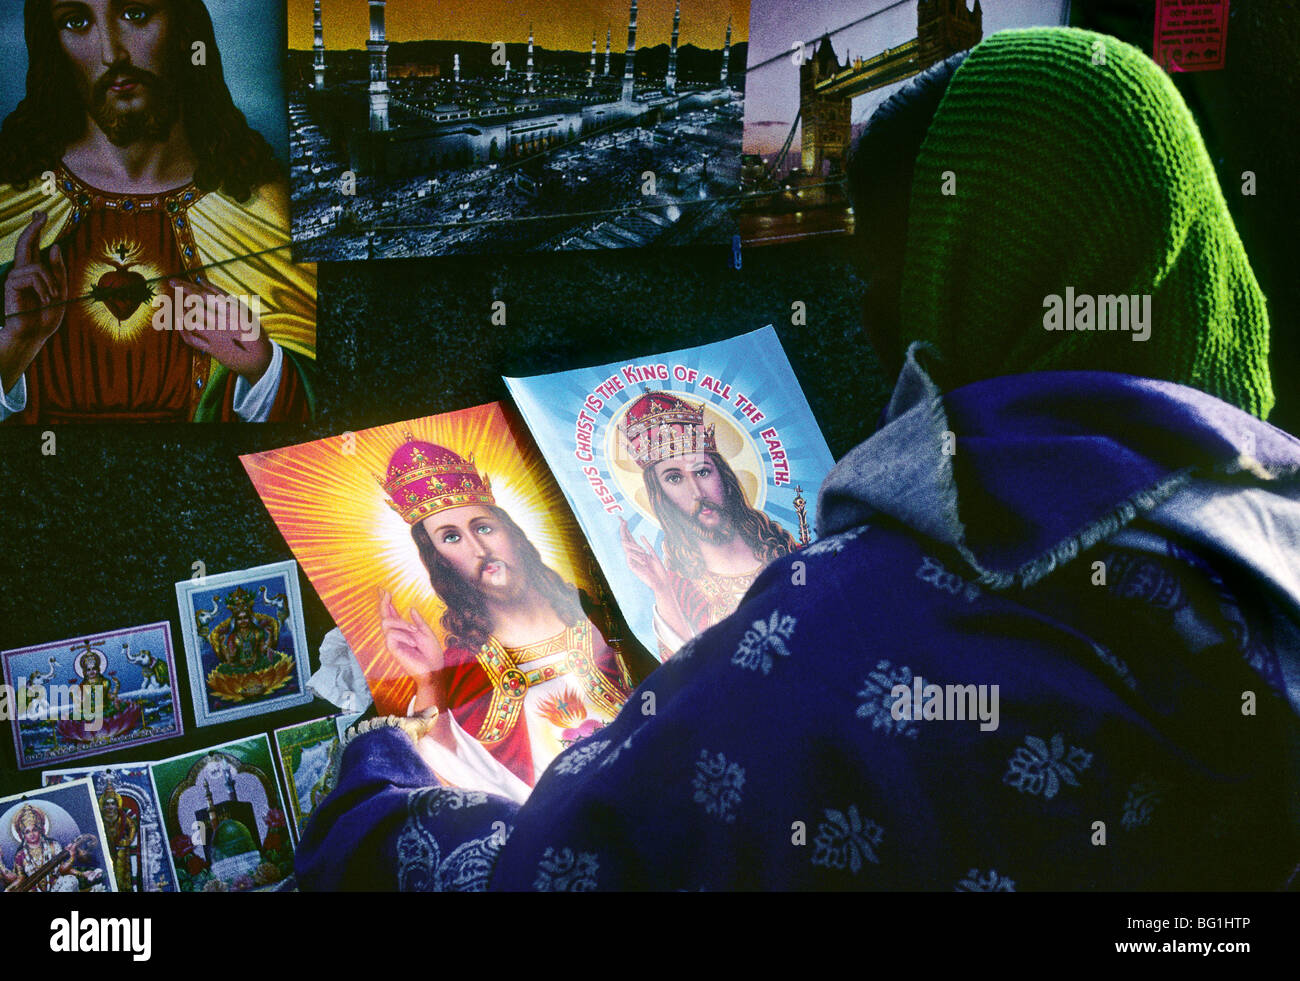 A woman is purchasing small poster-sized images of Jesus at a shop selling Hindu as well as Christian imagery in the public market in Ooty, India Stock Photo